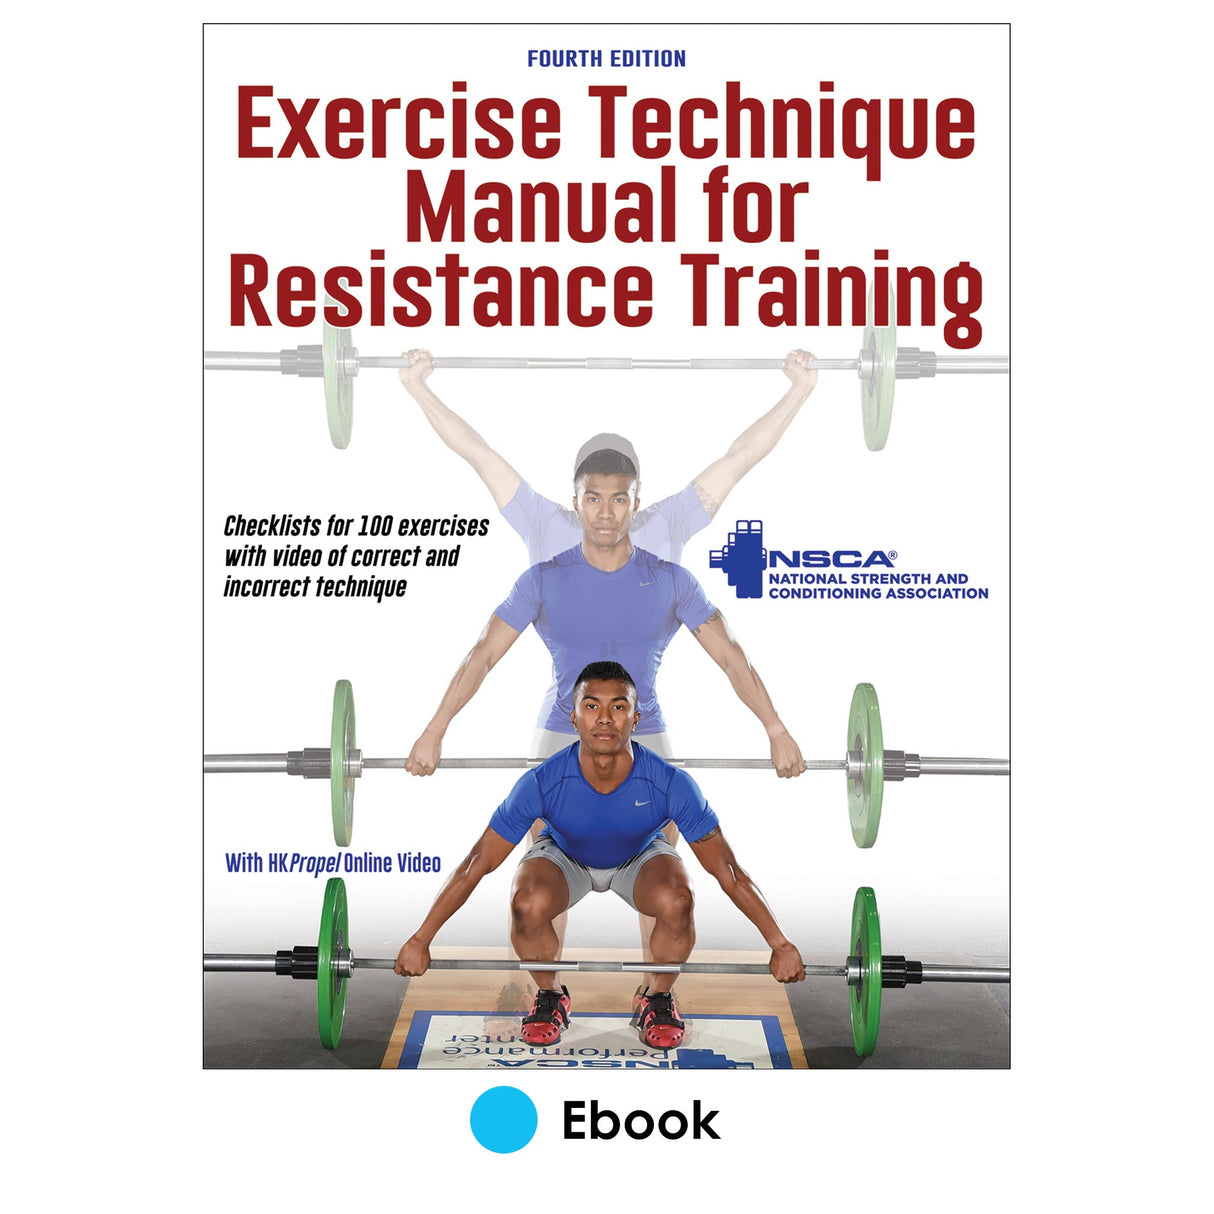 Exercise Technique Manual for Resistance Training 4th Edition Ebook With HKPropel Online Video